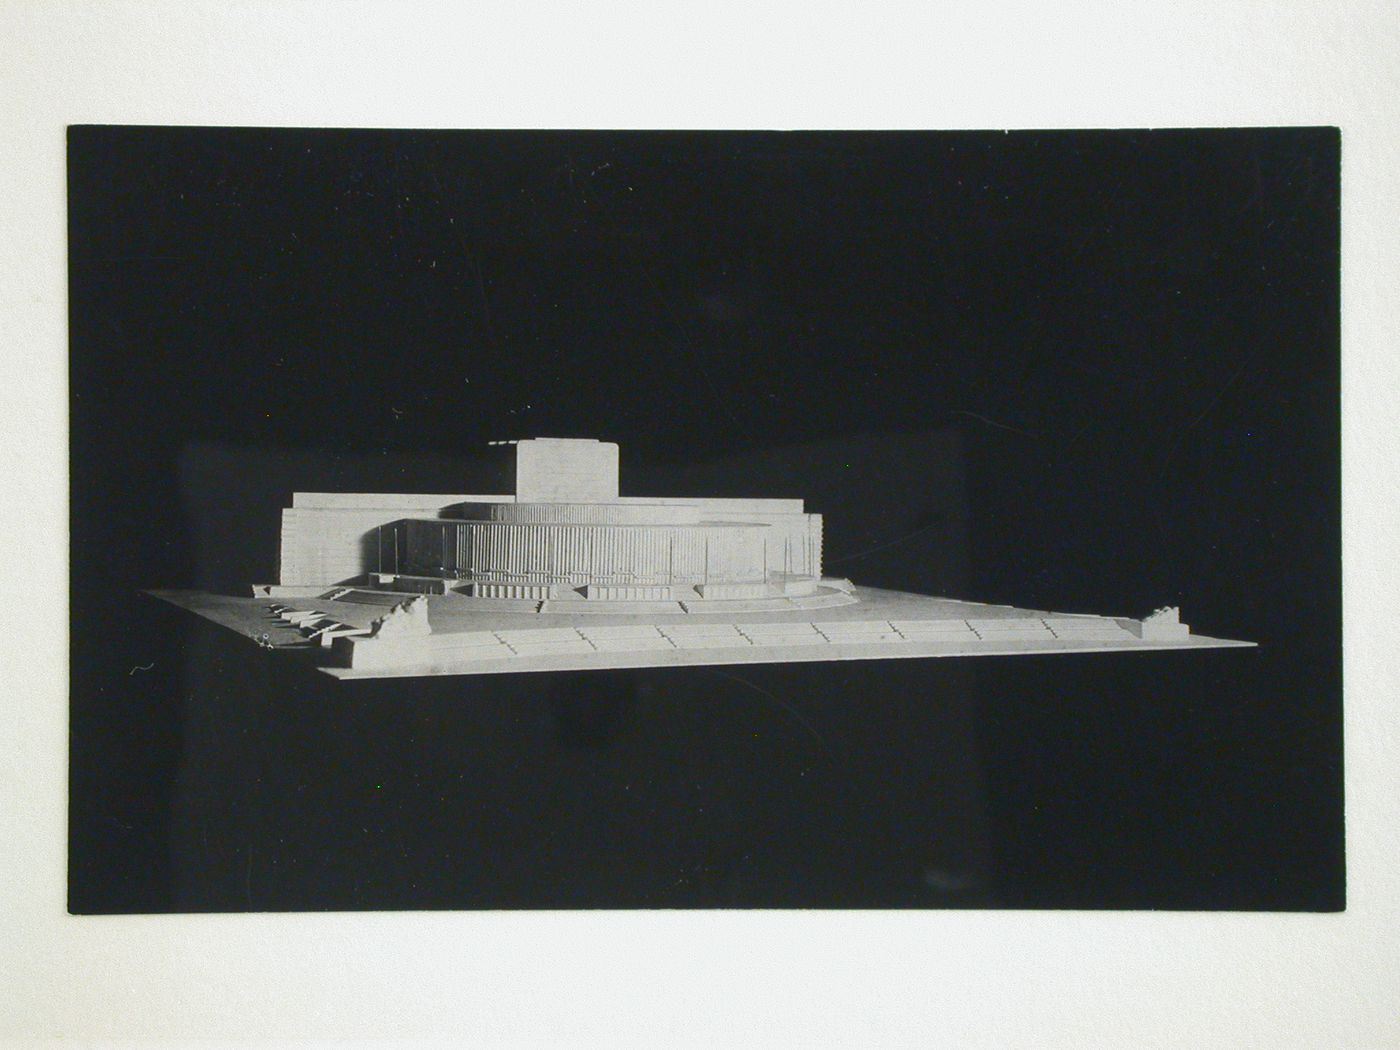 Photograph of a model for the final round of competition for a "synthetic theater" in Sverdlovsk, Soviet Union (now  Ekaterinburg, Russia)